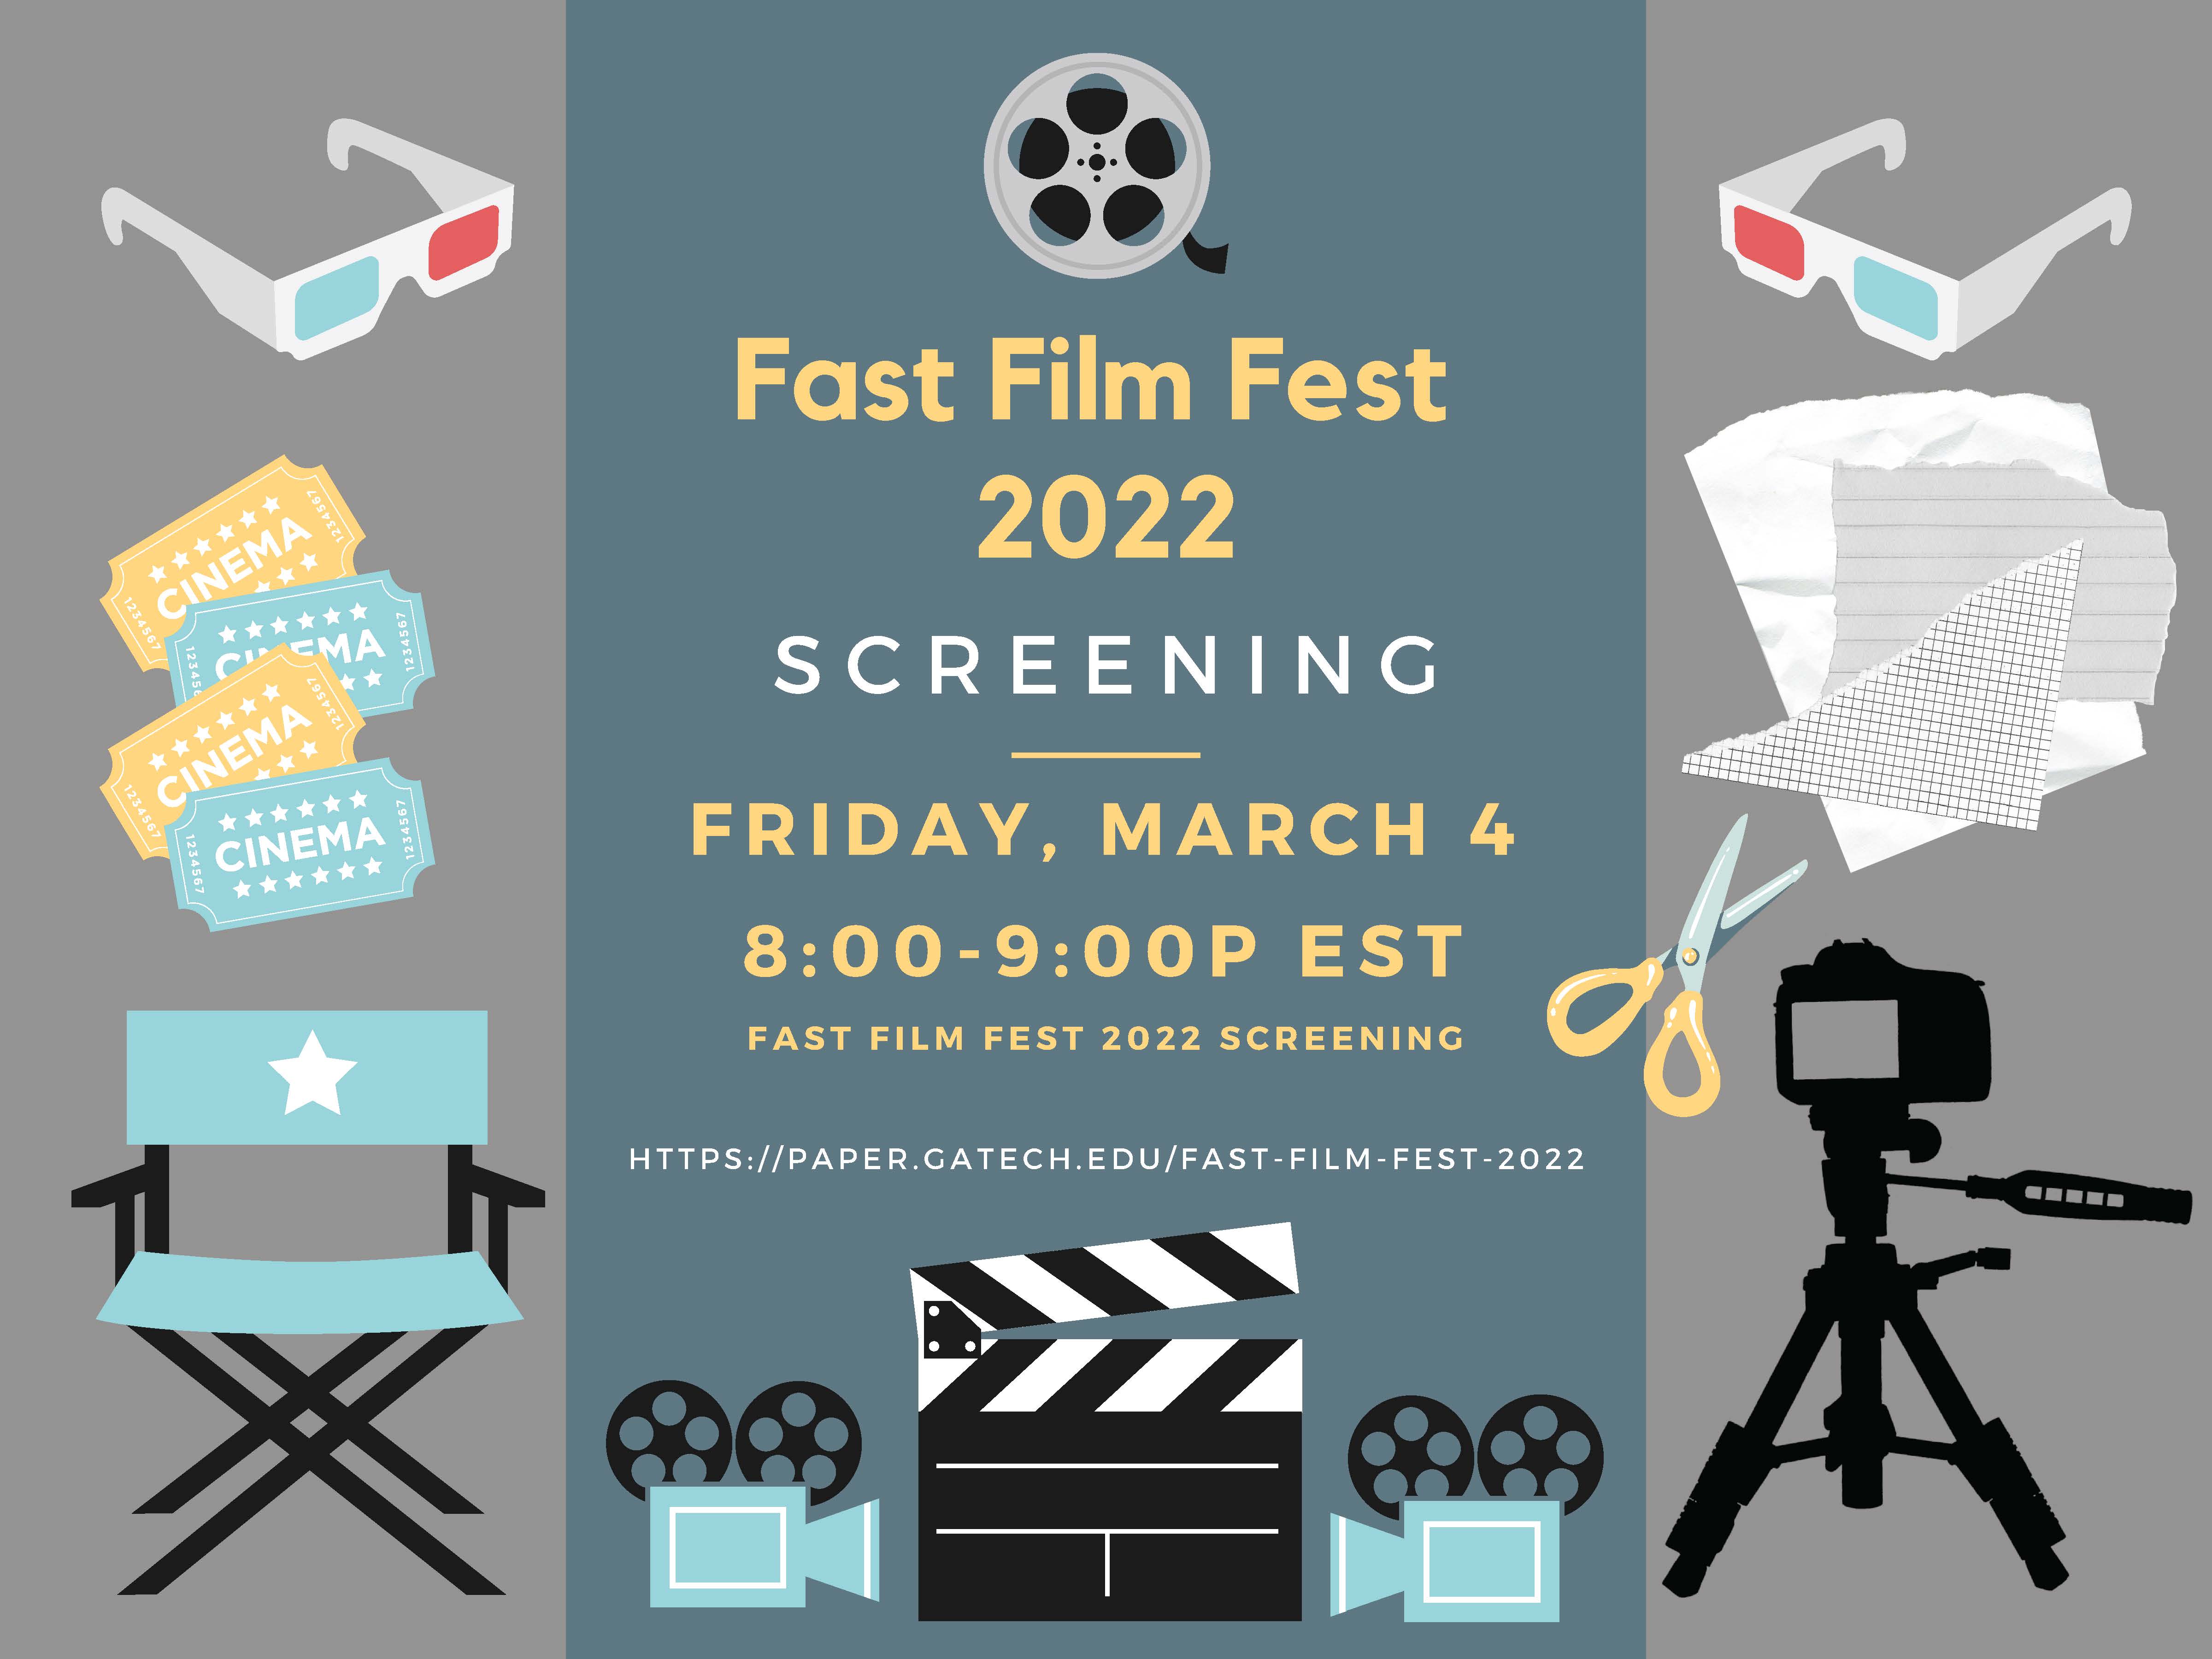 Fast Film Fest 2022 Screening Poster featuring film director's chairs, a clapperboard, scissors, torn paper, digital camera, and ticket stubs floating around the screening date and time